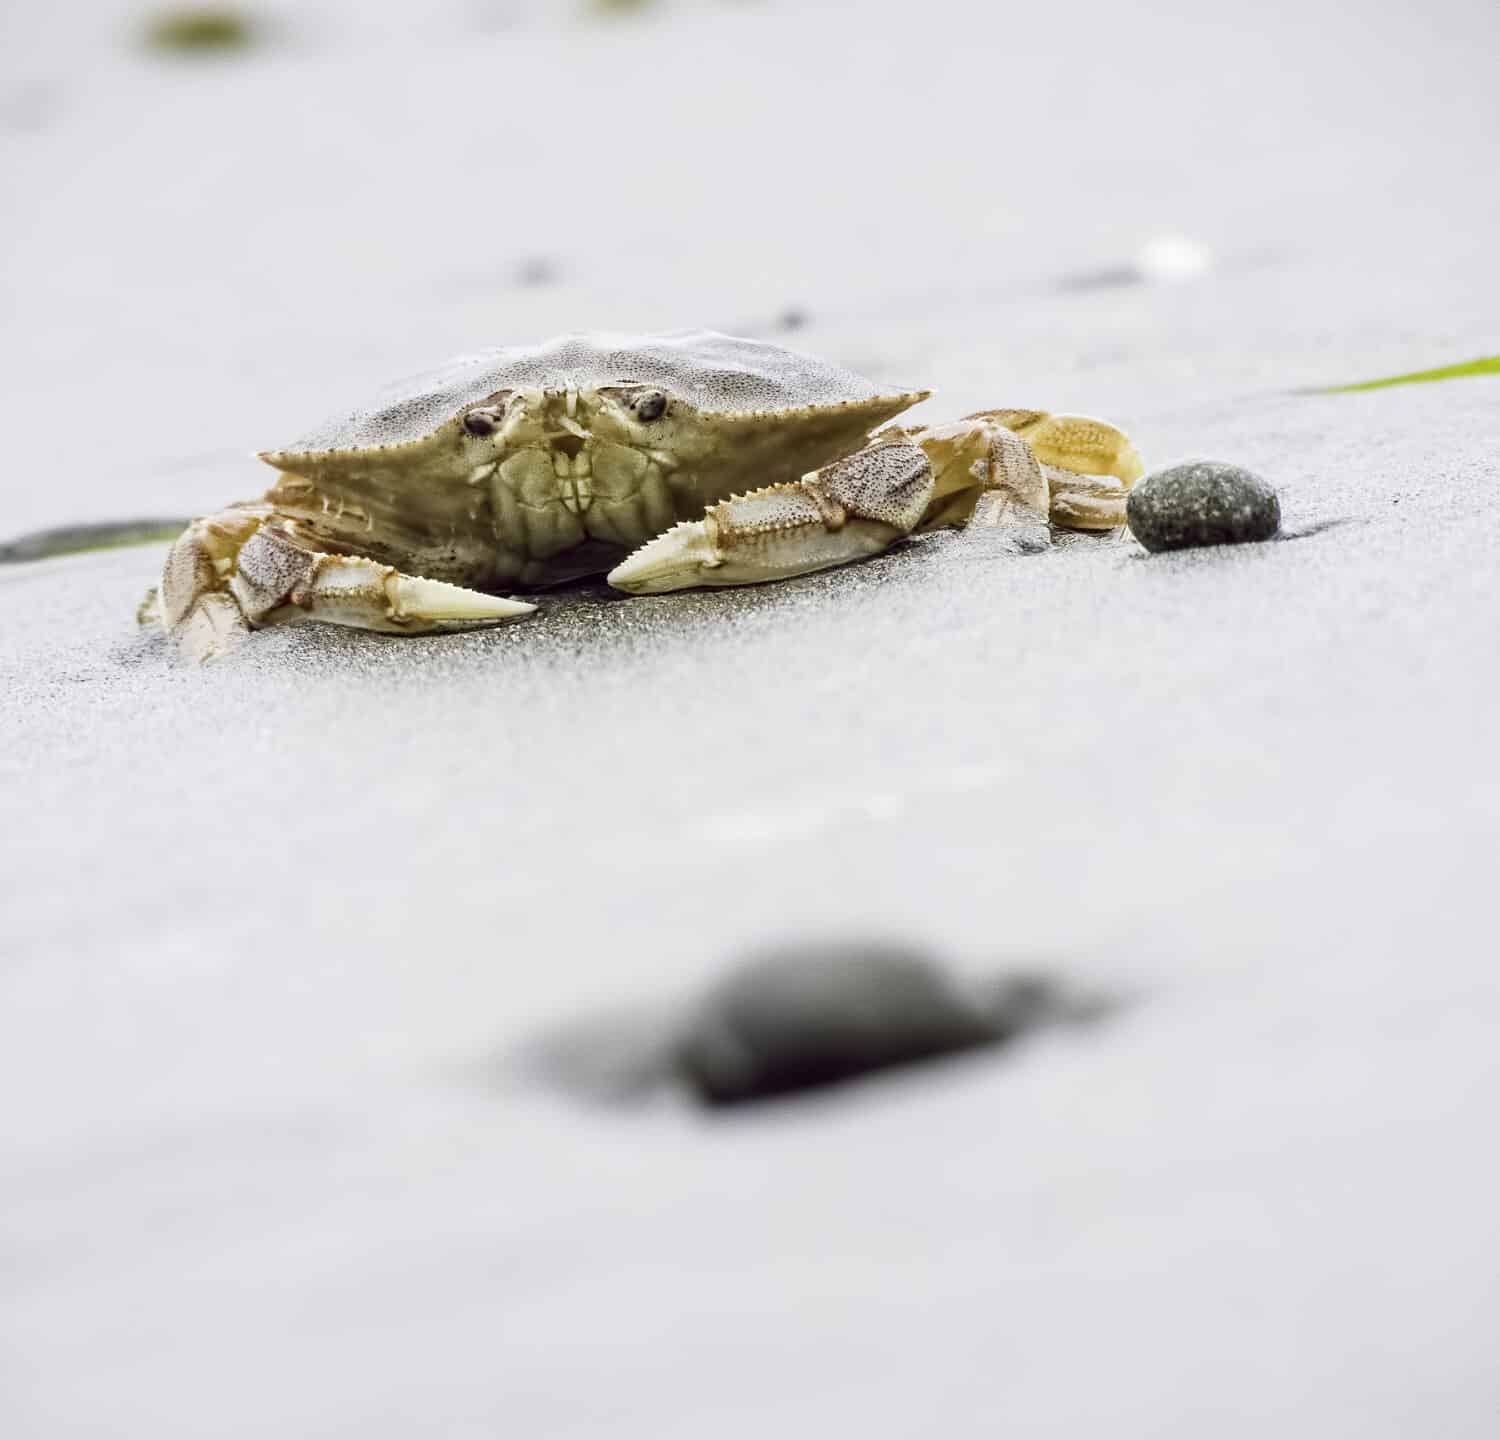 Small aquatic crab (unknown species) on sandy beach along the Pacific coast of Washington (selective focus)